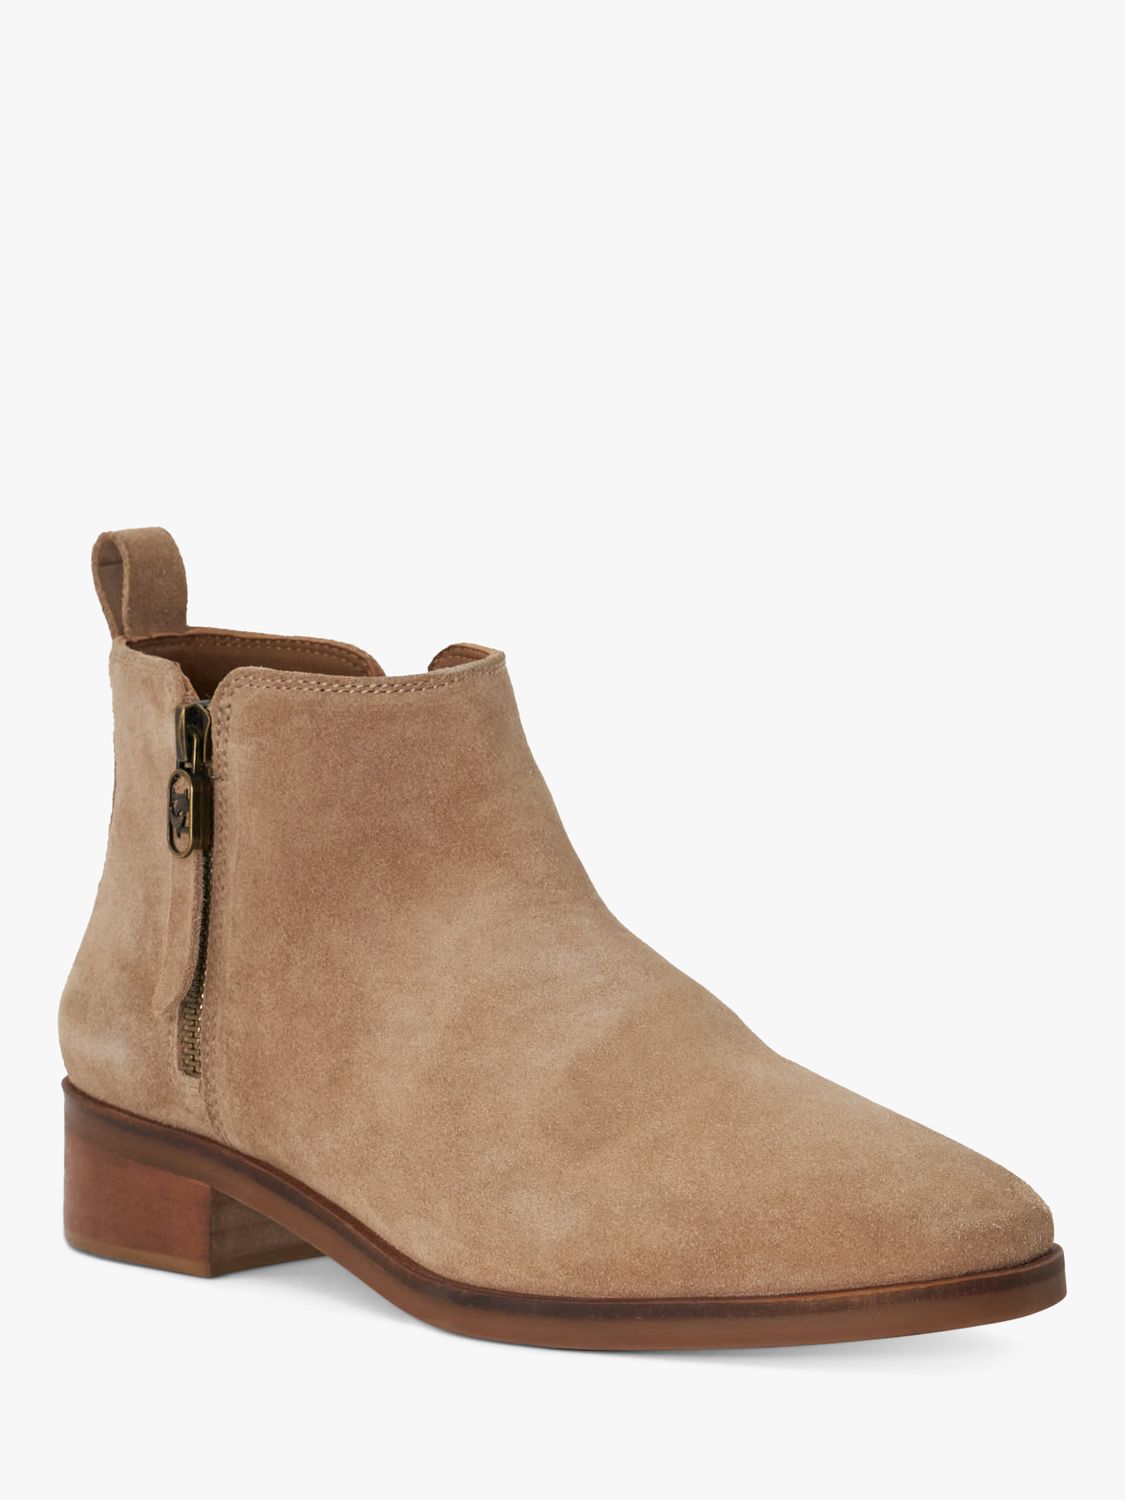 Dune Progress Suede Side Zip Short Ankle Boots, Taupe, EU36